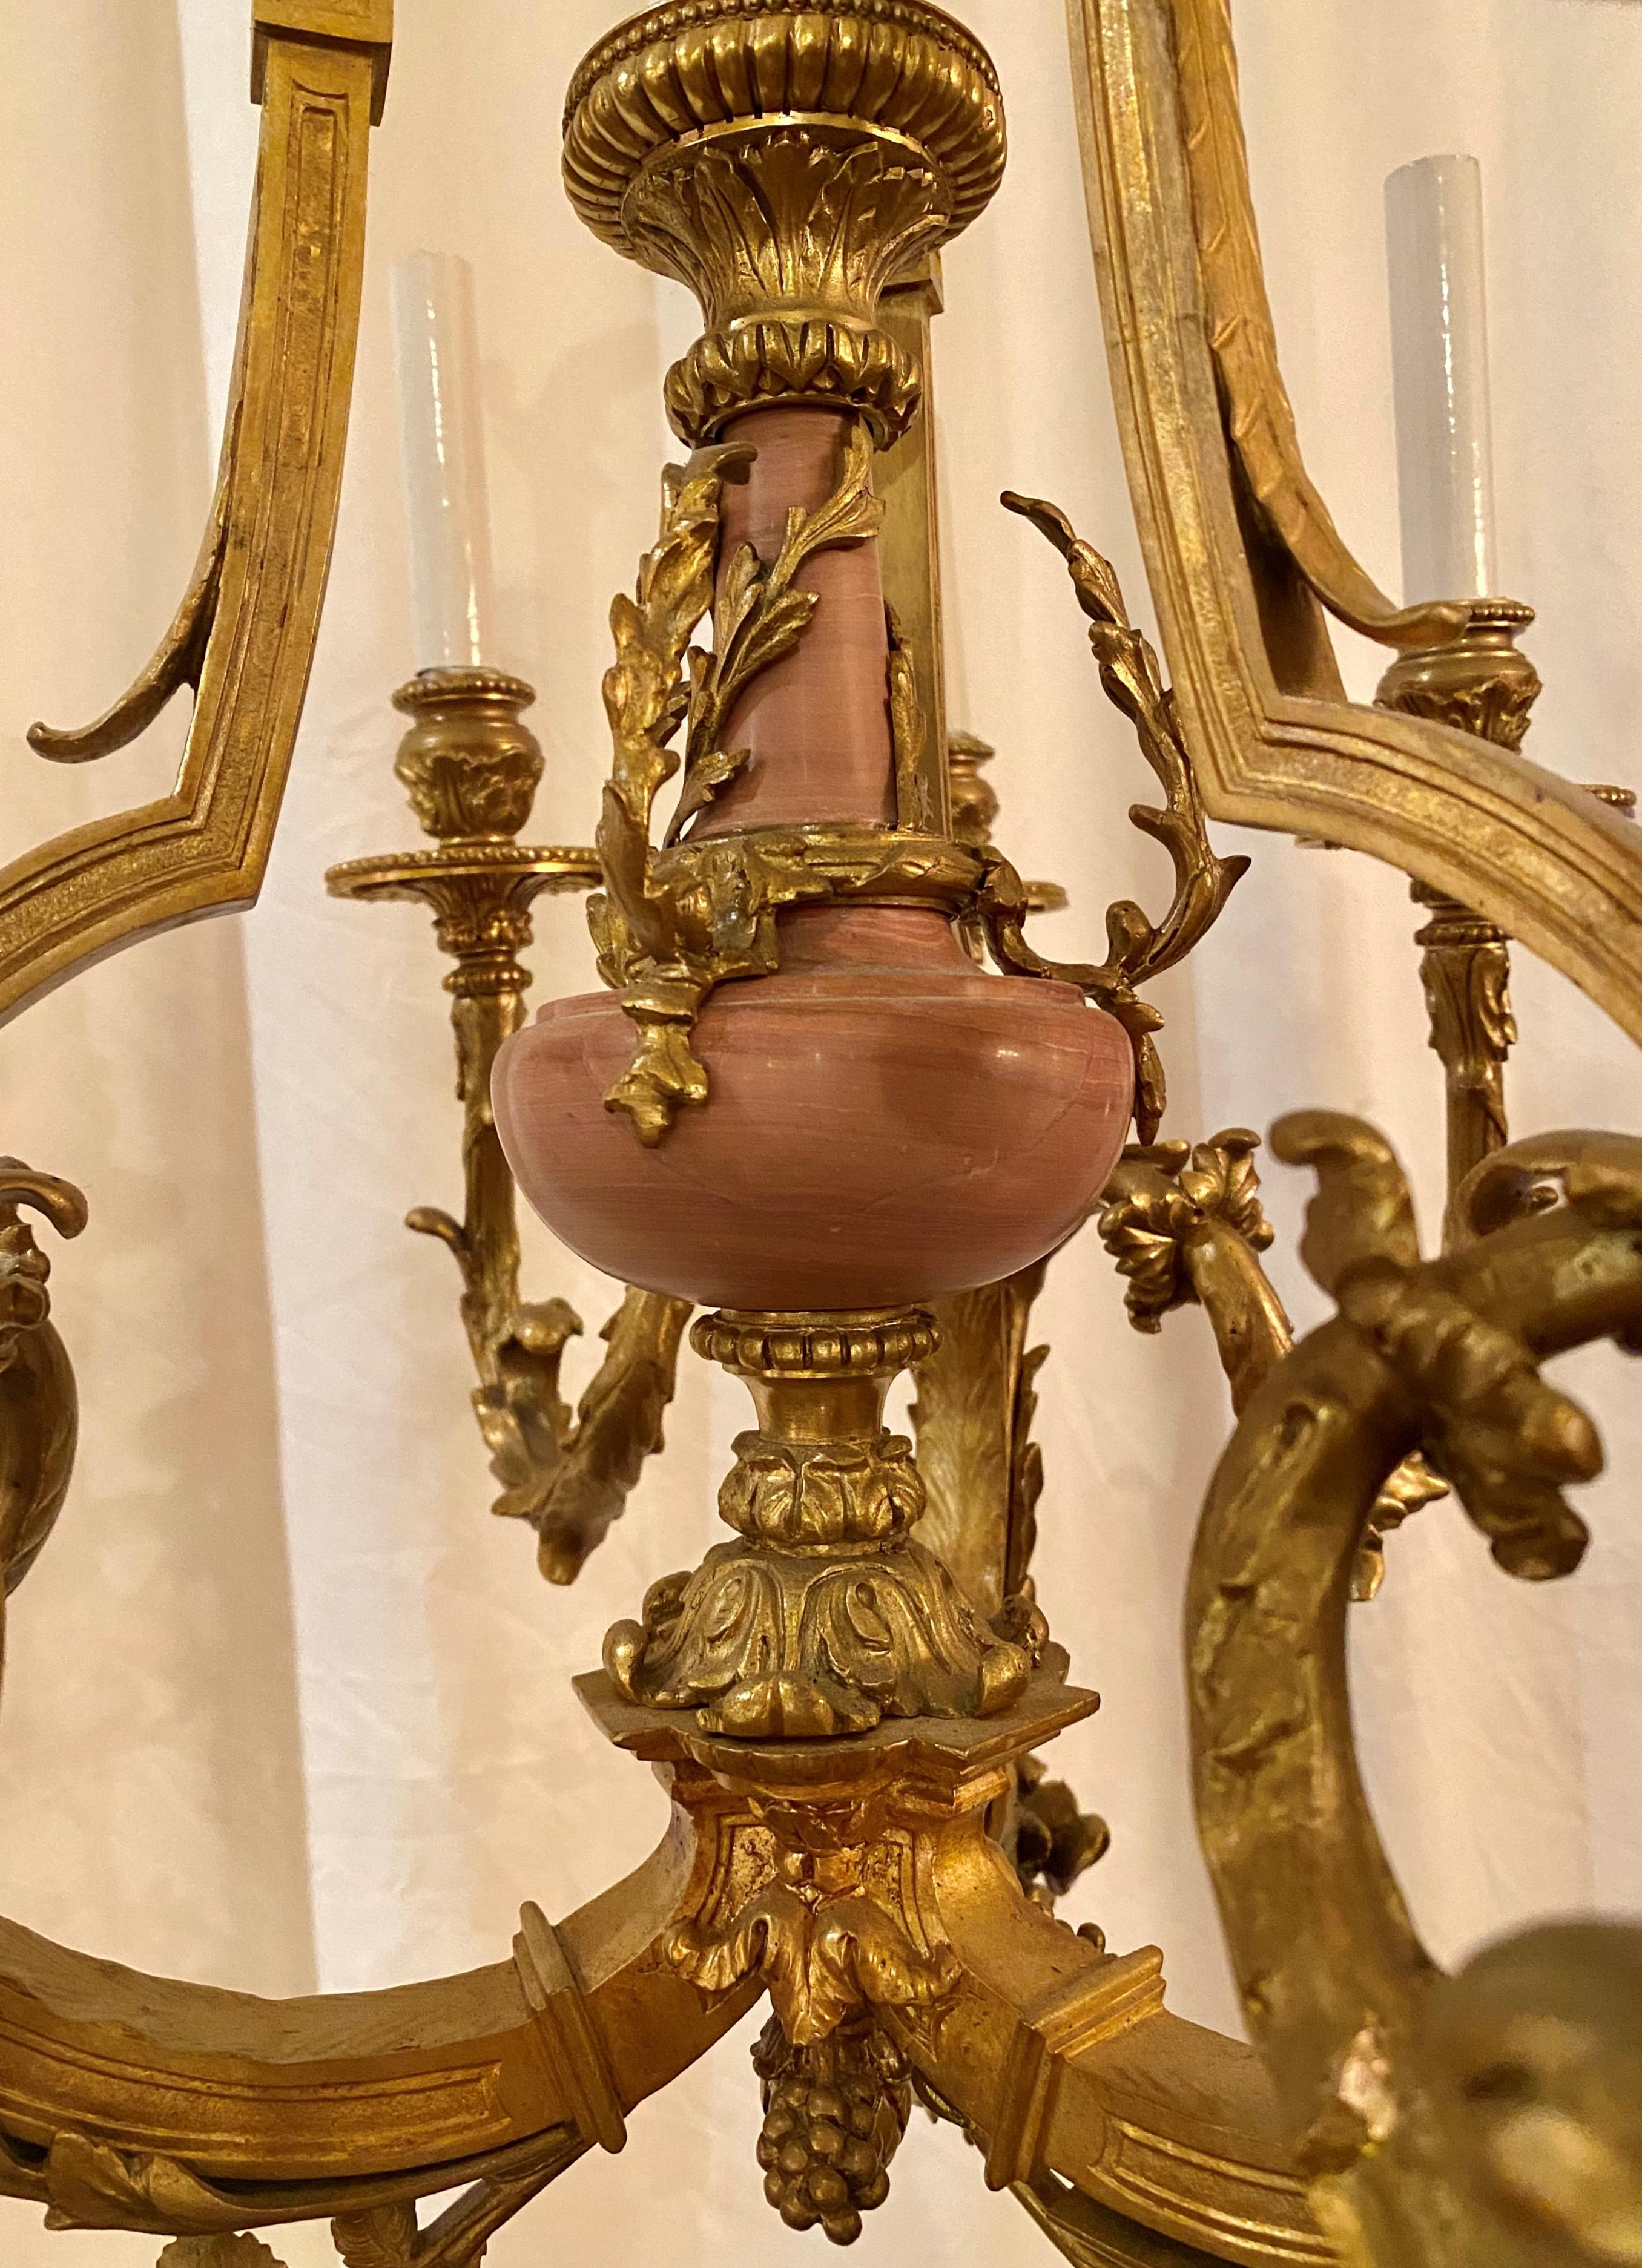 Antique French Louis XVI gold bronze and pink marble chandelier, circa 1865-1880.
CHB118.